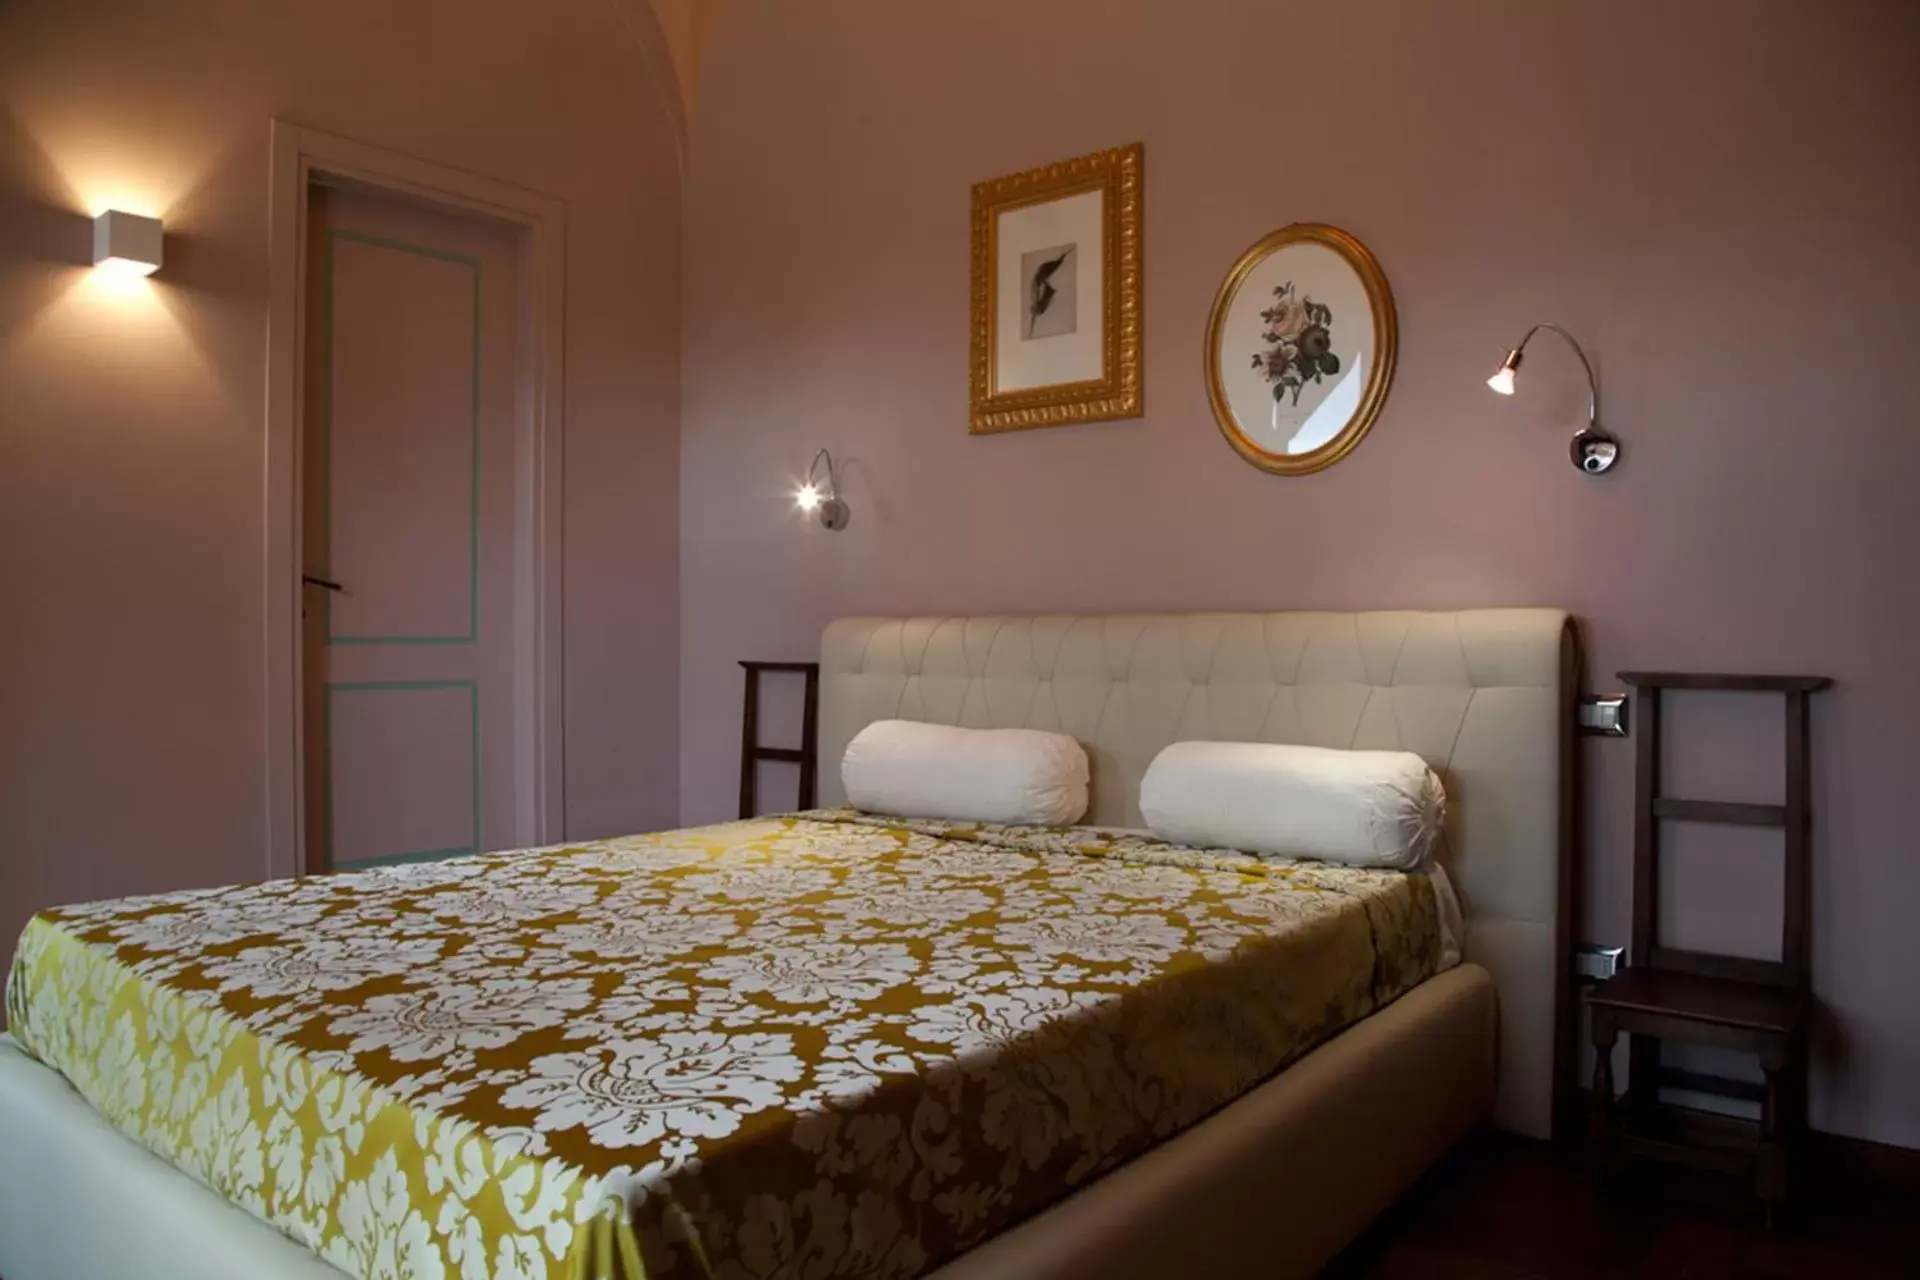 Bed, Room Photo in Relais Montemaggiore